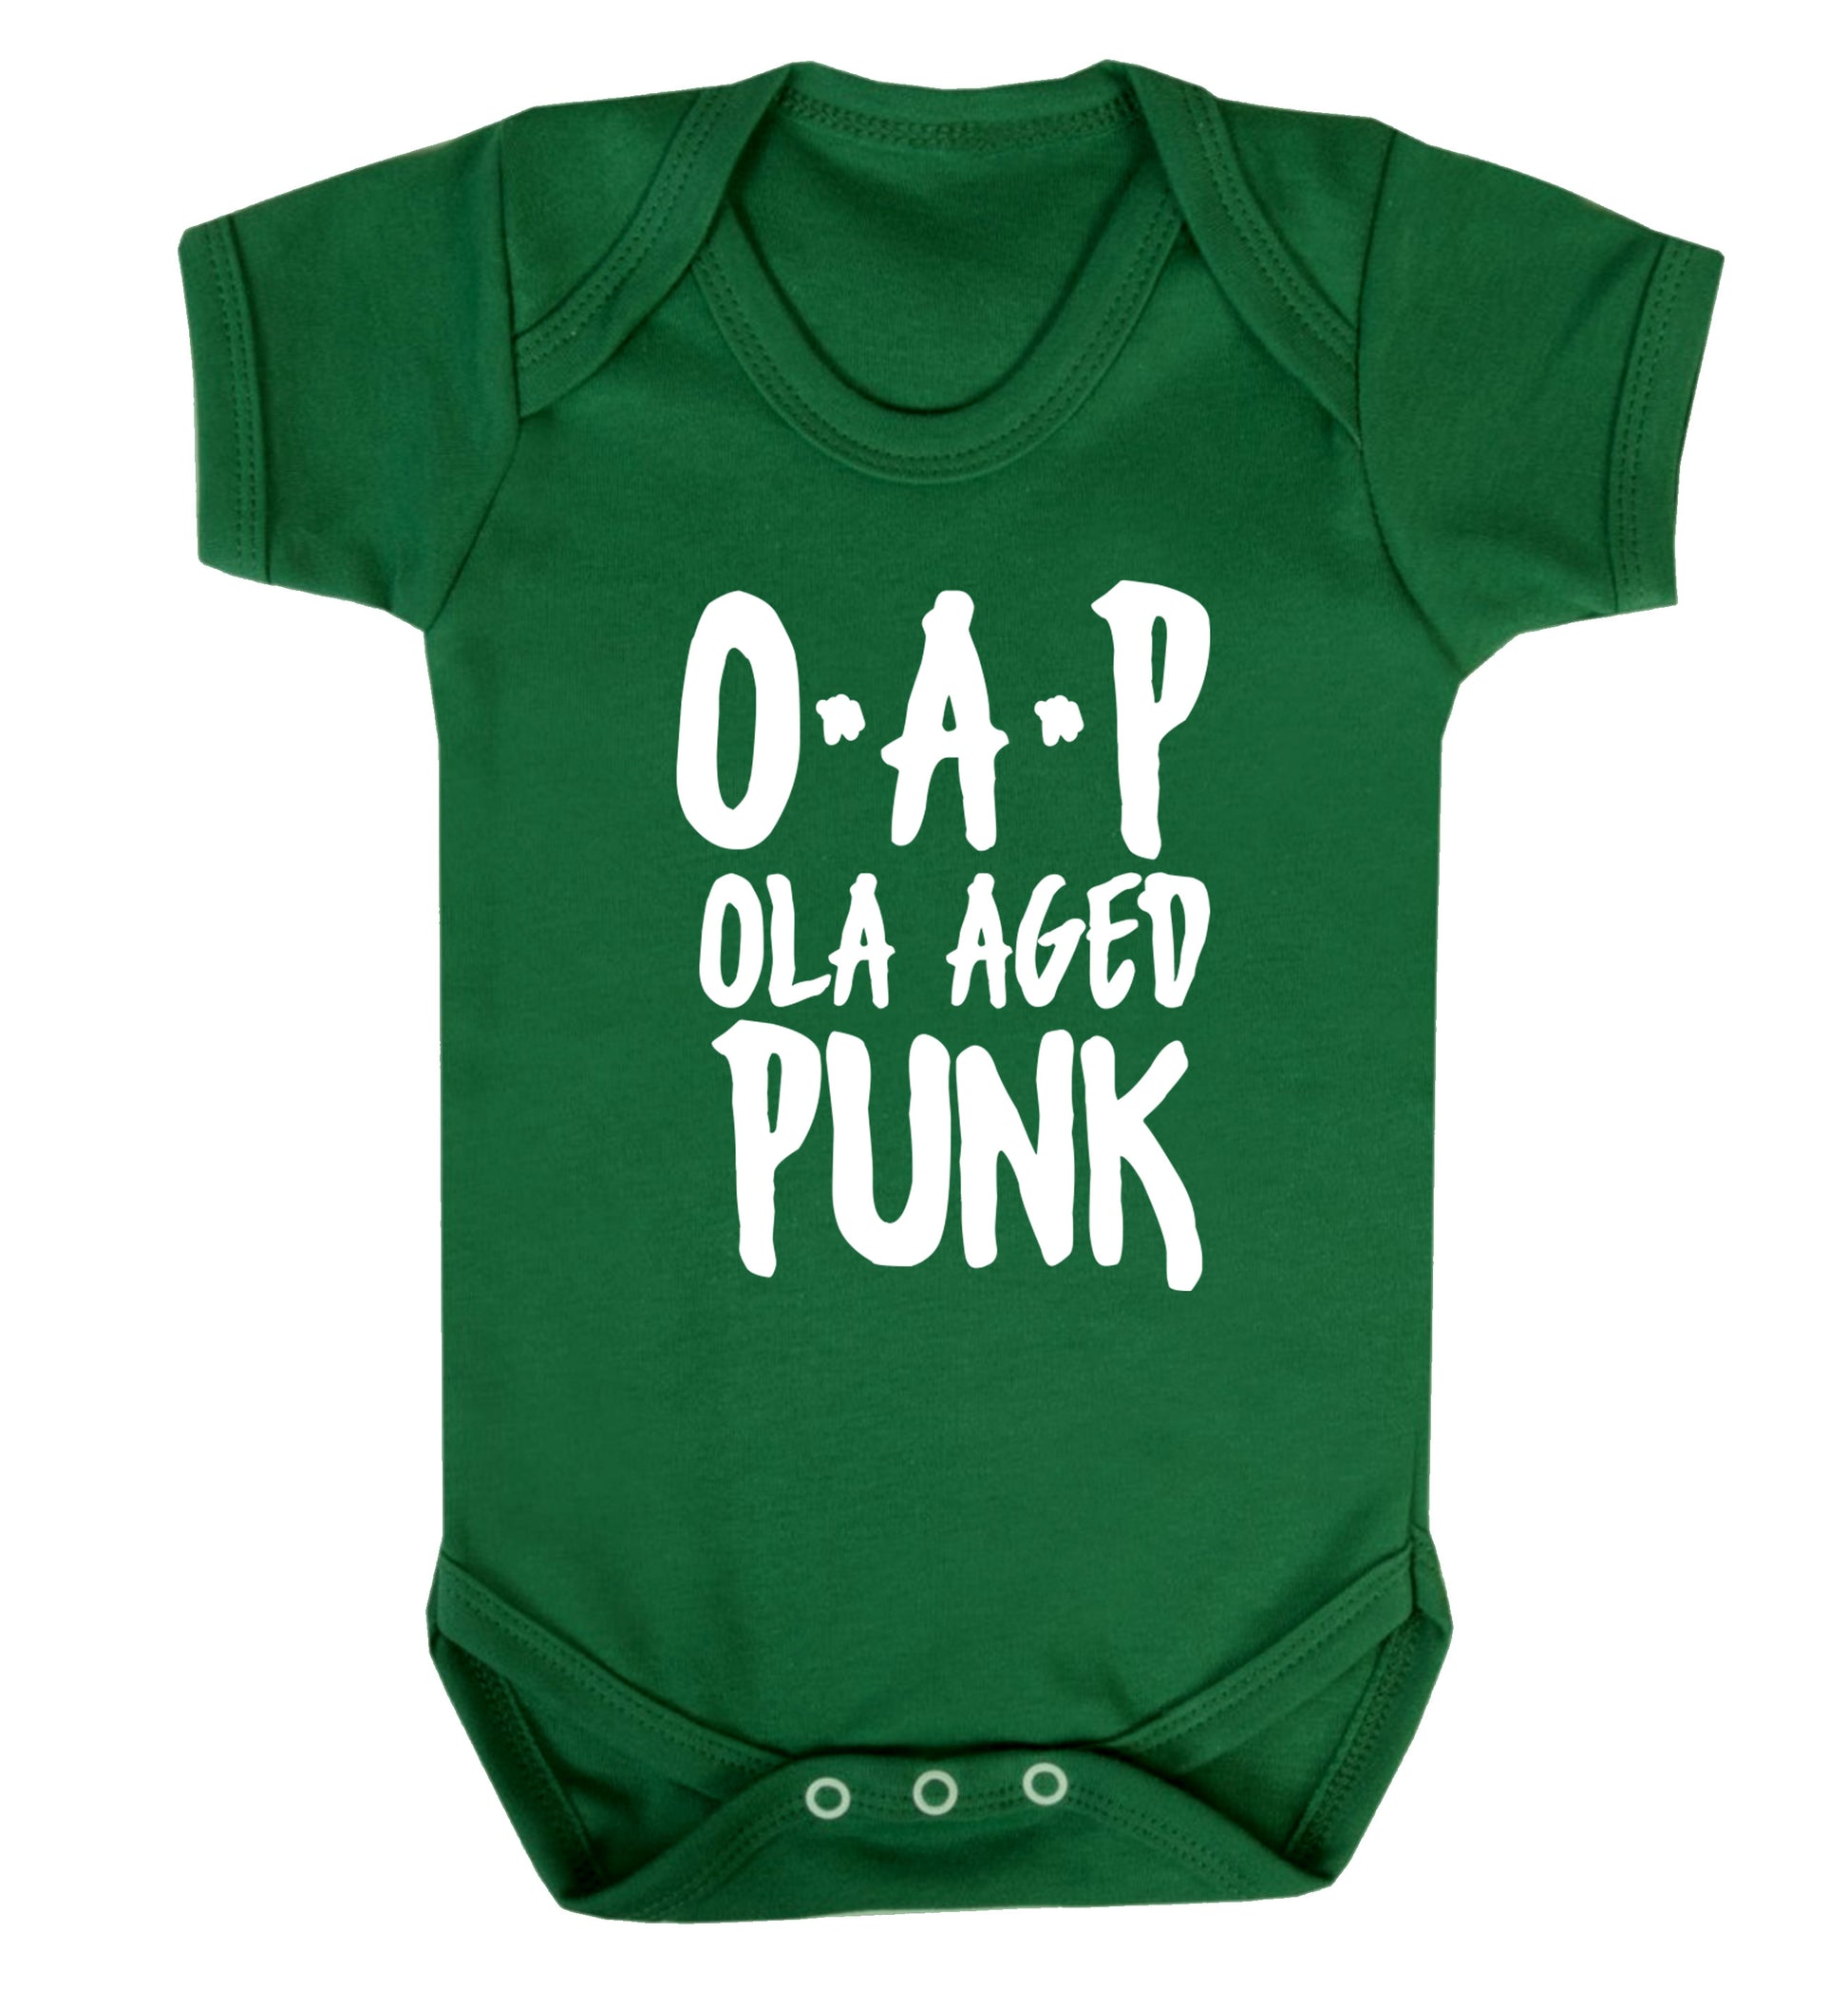 O.A.P Old Aged Punk Baby Vest green 18-24 months